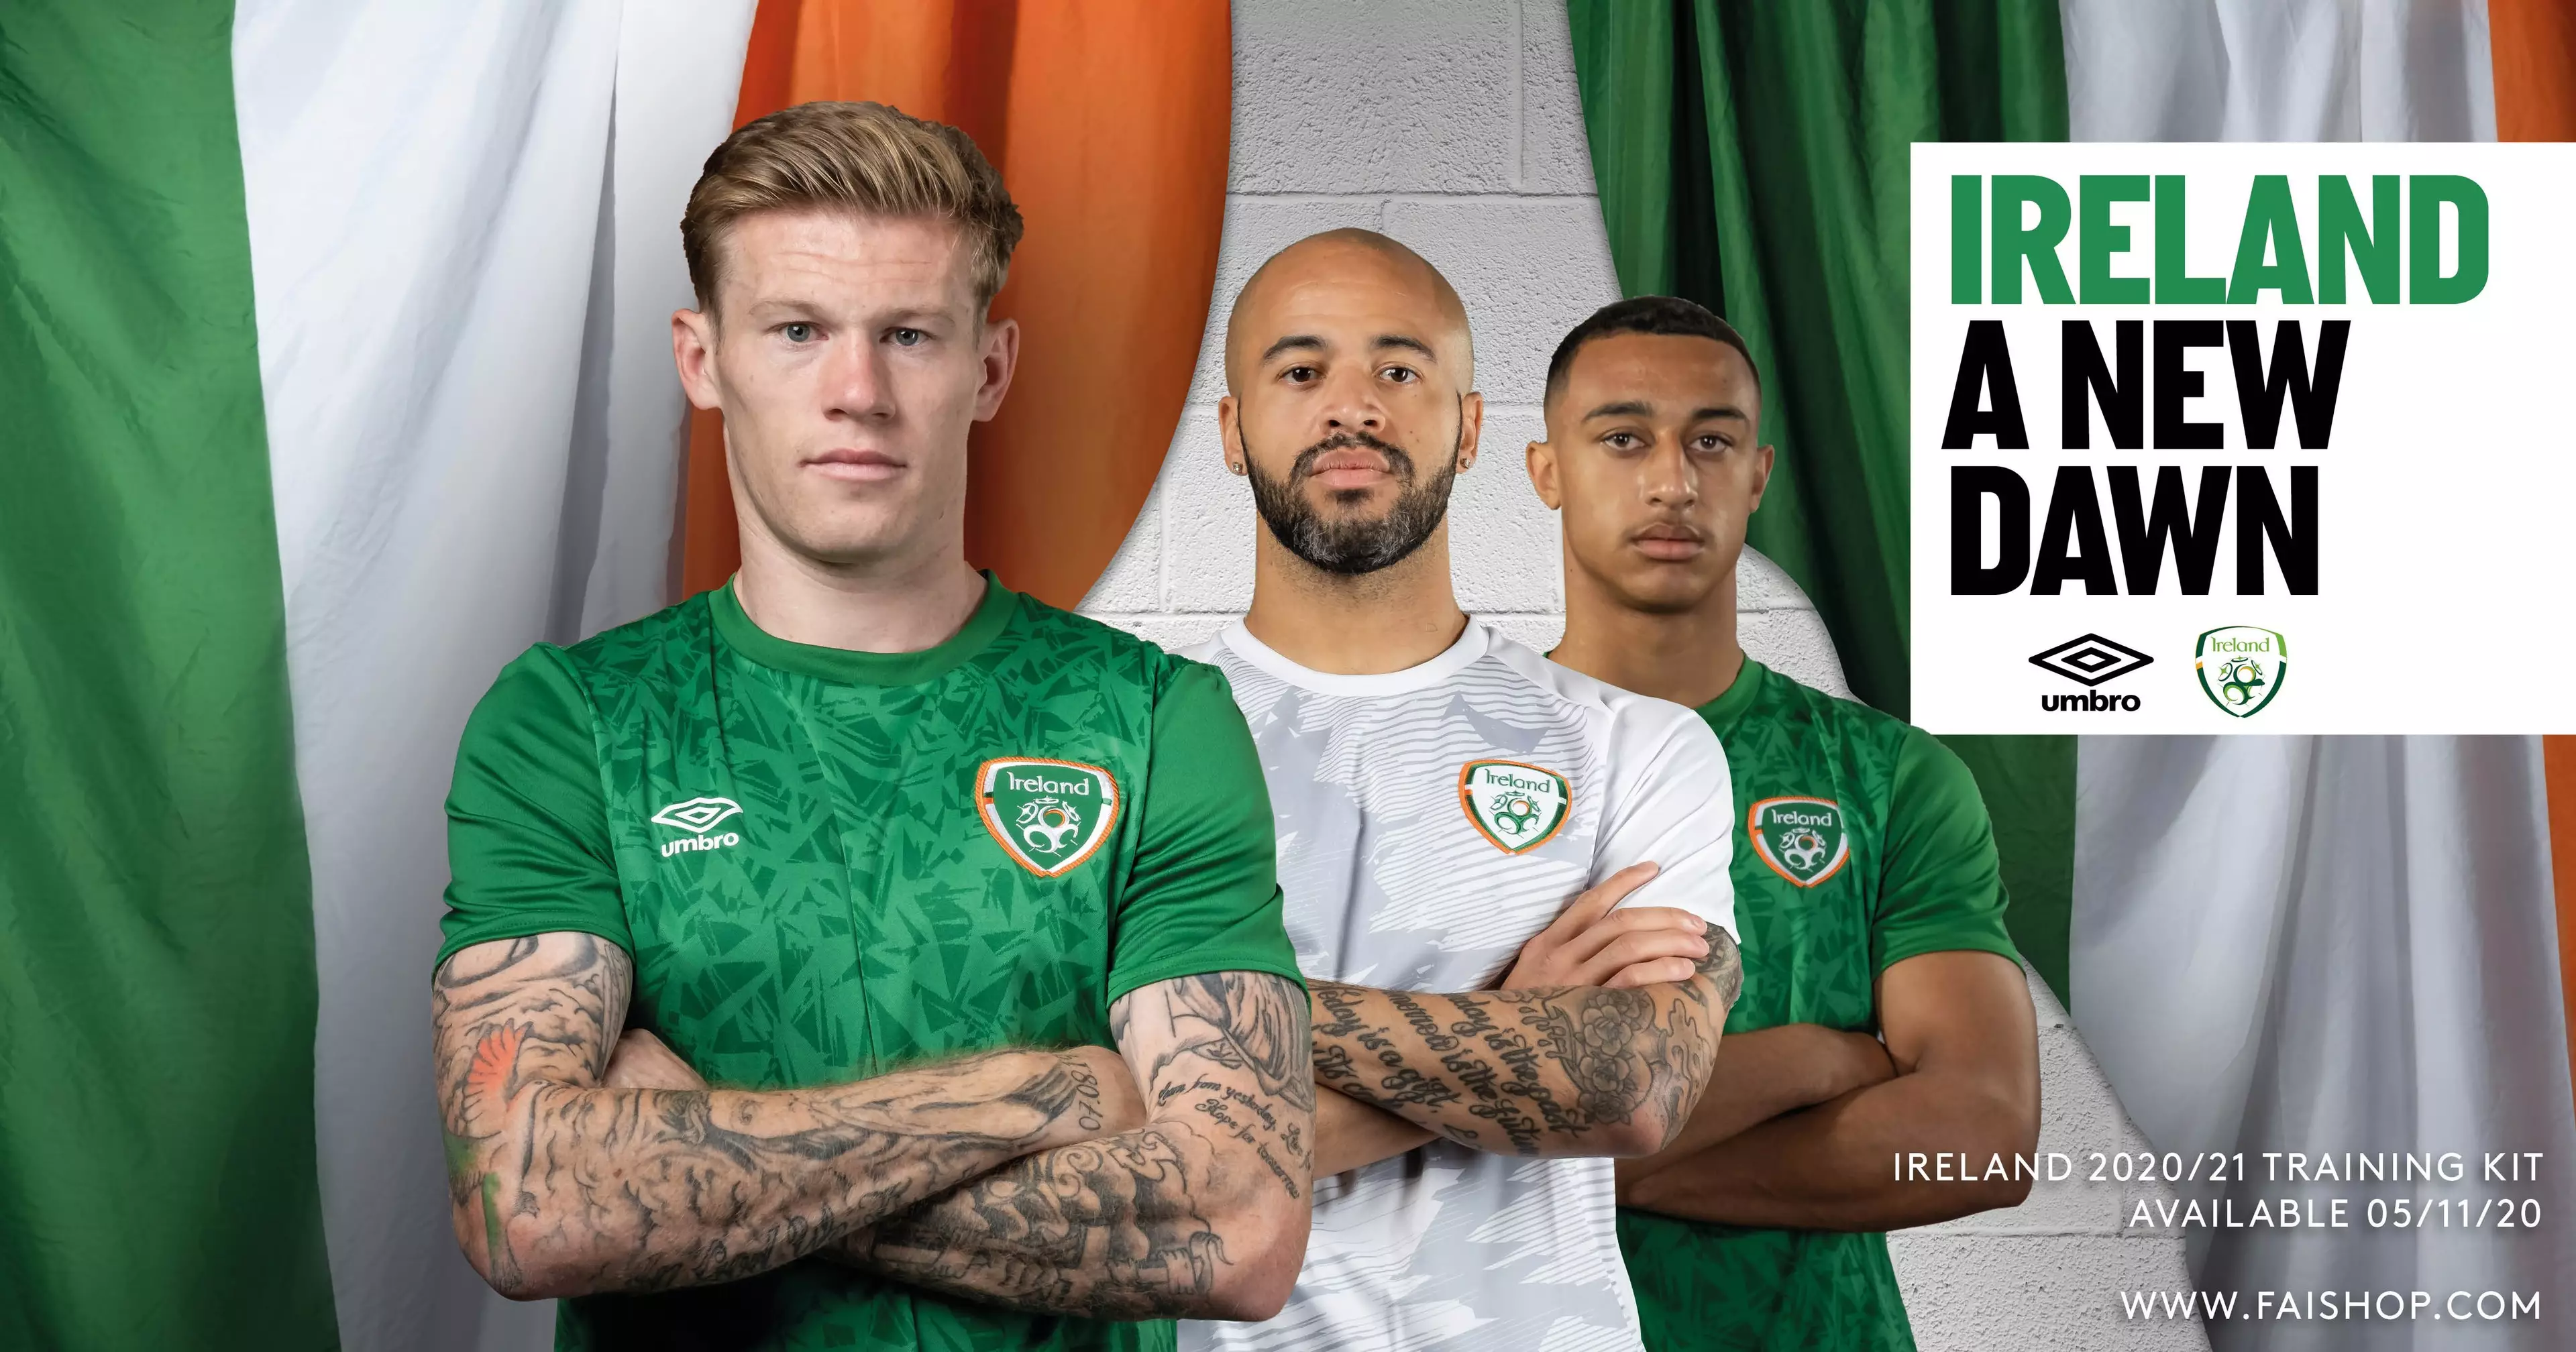 Umbro Just Released Images Of The New Ireland Top And We Love it